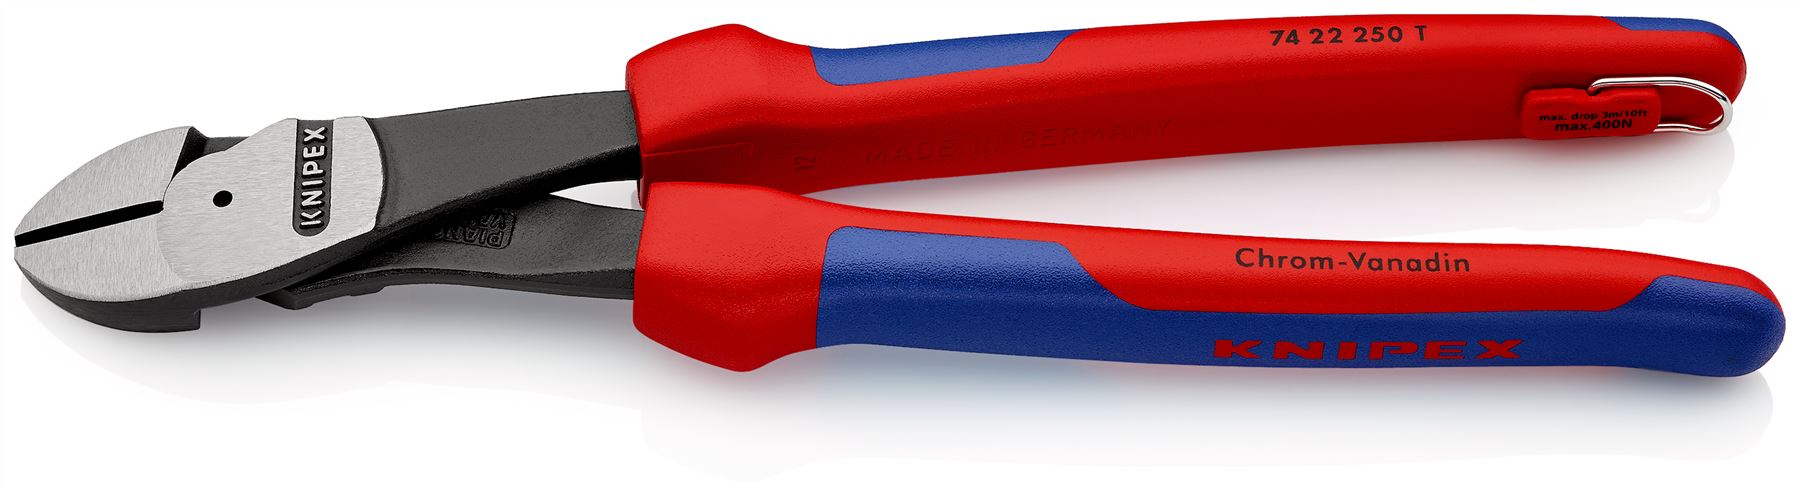 Knipex High Leverage Diagonal Cutter 12° Angled Head 250mm Multi Component Grips Tether Point 74 22 250 T